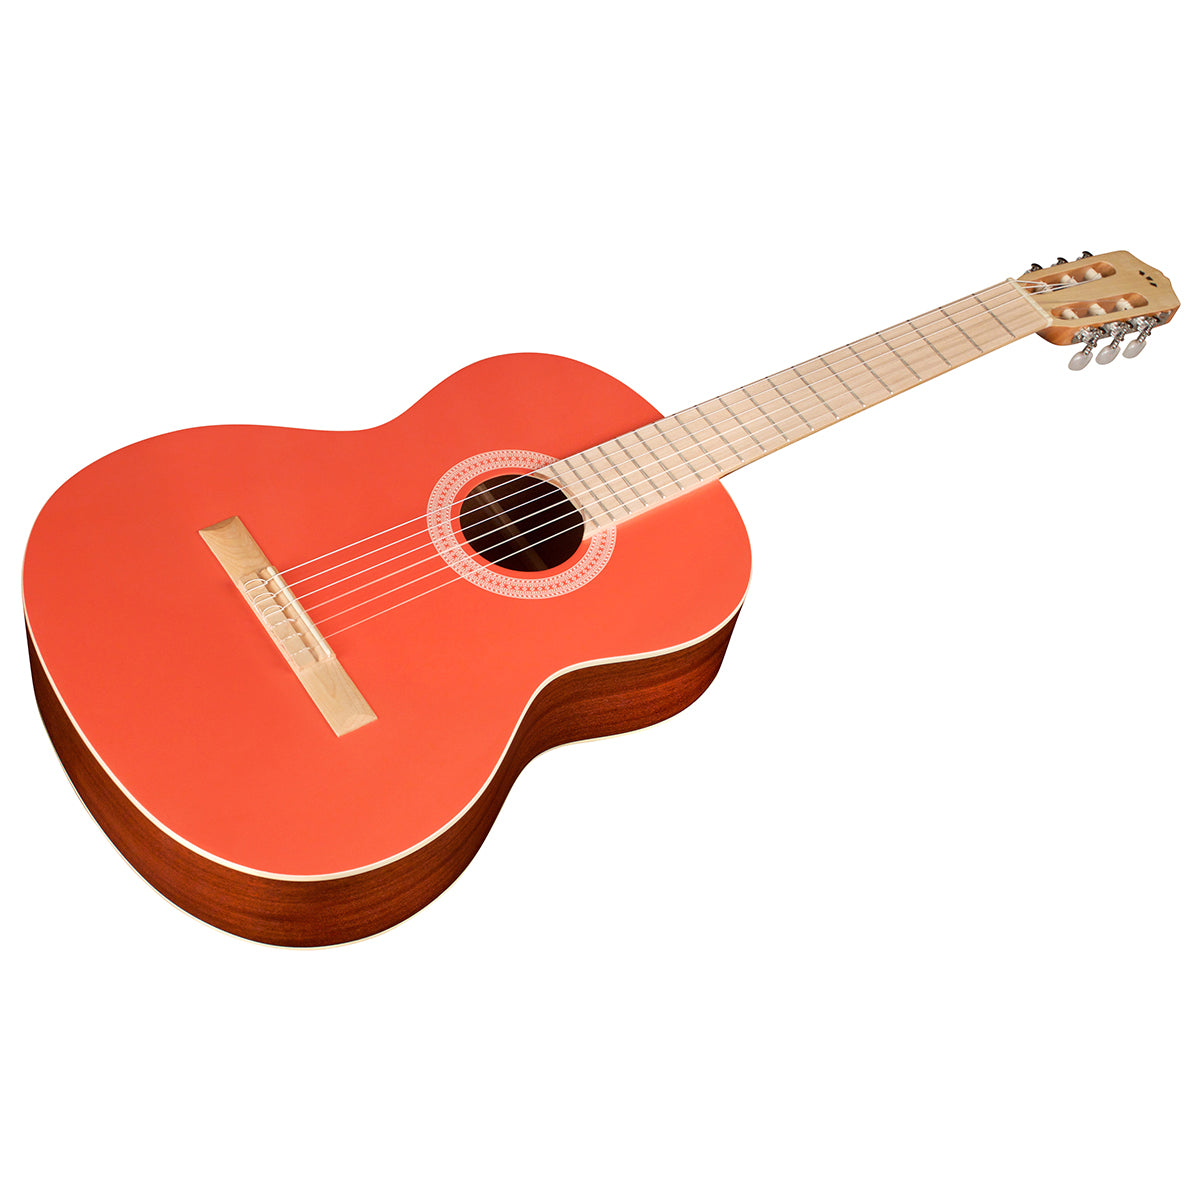 Cordoba Protege C1 Matiz Classical Guitar in Coral with Color-Matching Nylon Gig Bag